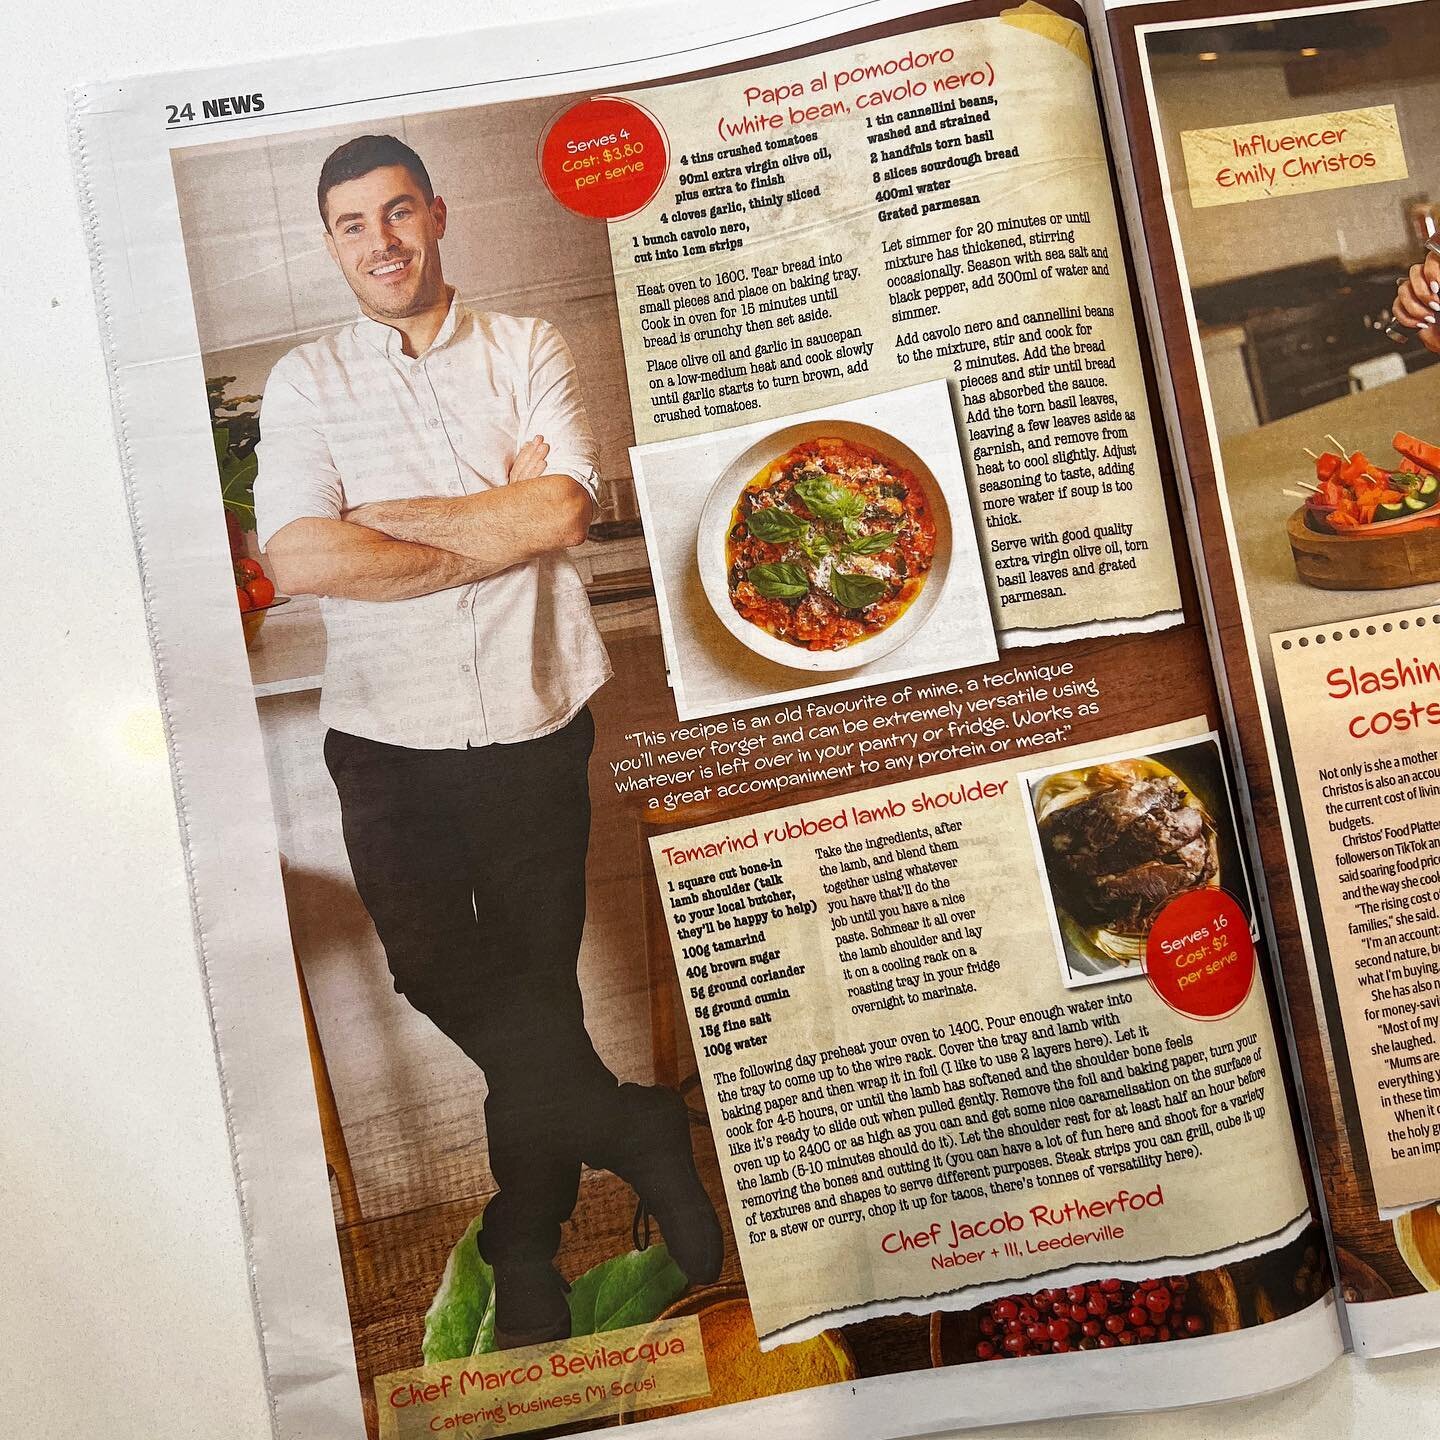 FEATURED IN TODAY&rsquo;S SUNDAY TIMES 🍅

DELICIOUS PAPA AL POMODORO BY CHEF MARCO - THAT YOU CAN TRY IN LIGHT OF RISING FOOD COSTS THROUGHOUT AUSTRALIA.

GET YOUR COPY TODAY &amp; LETS EAT@MISCUSIFOOD.COM.AU

#MISCUSI #MISCUSIFOOD #SUNDAYTIMES #PRE